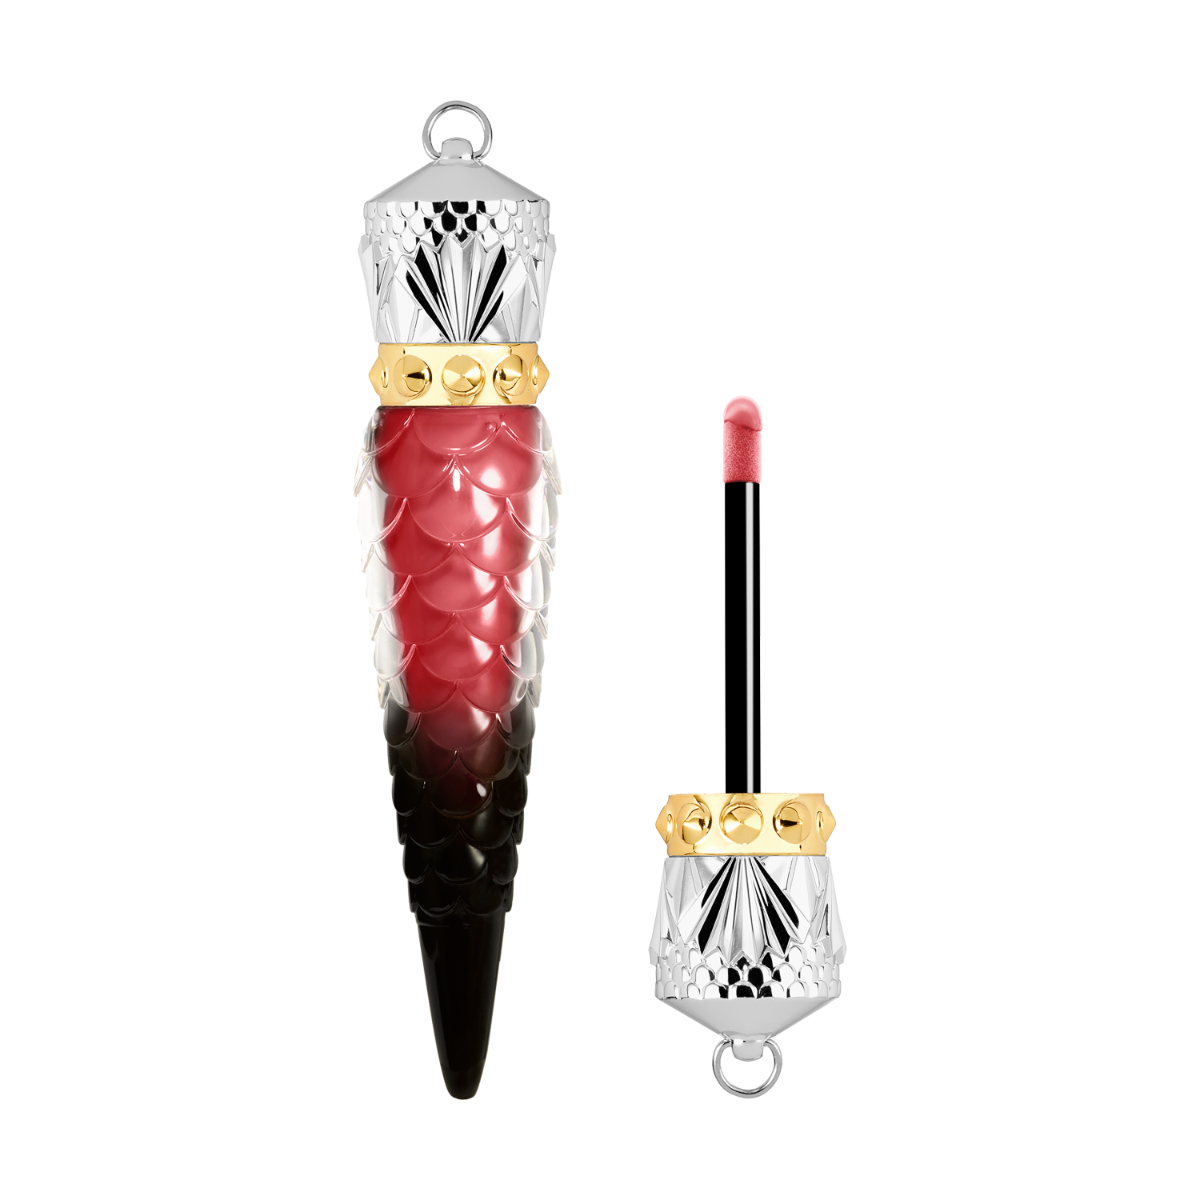 Louboutin Lipstick Belly Bloom, Tres Decollete, You You, Rose du